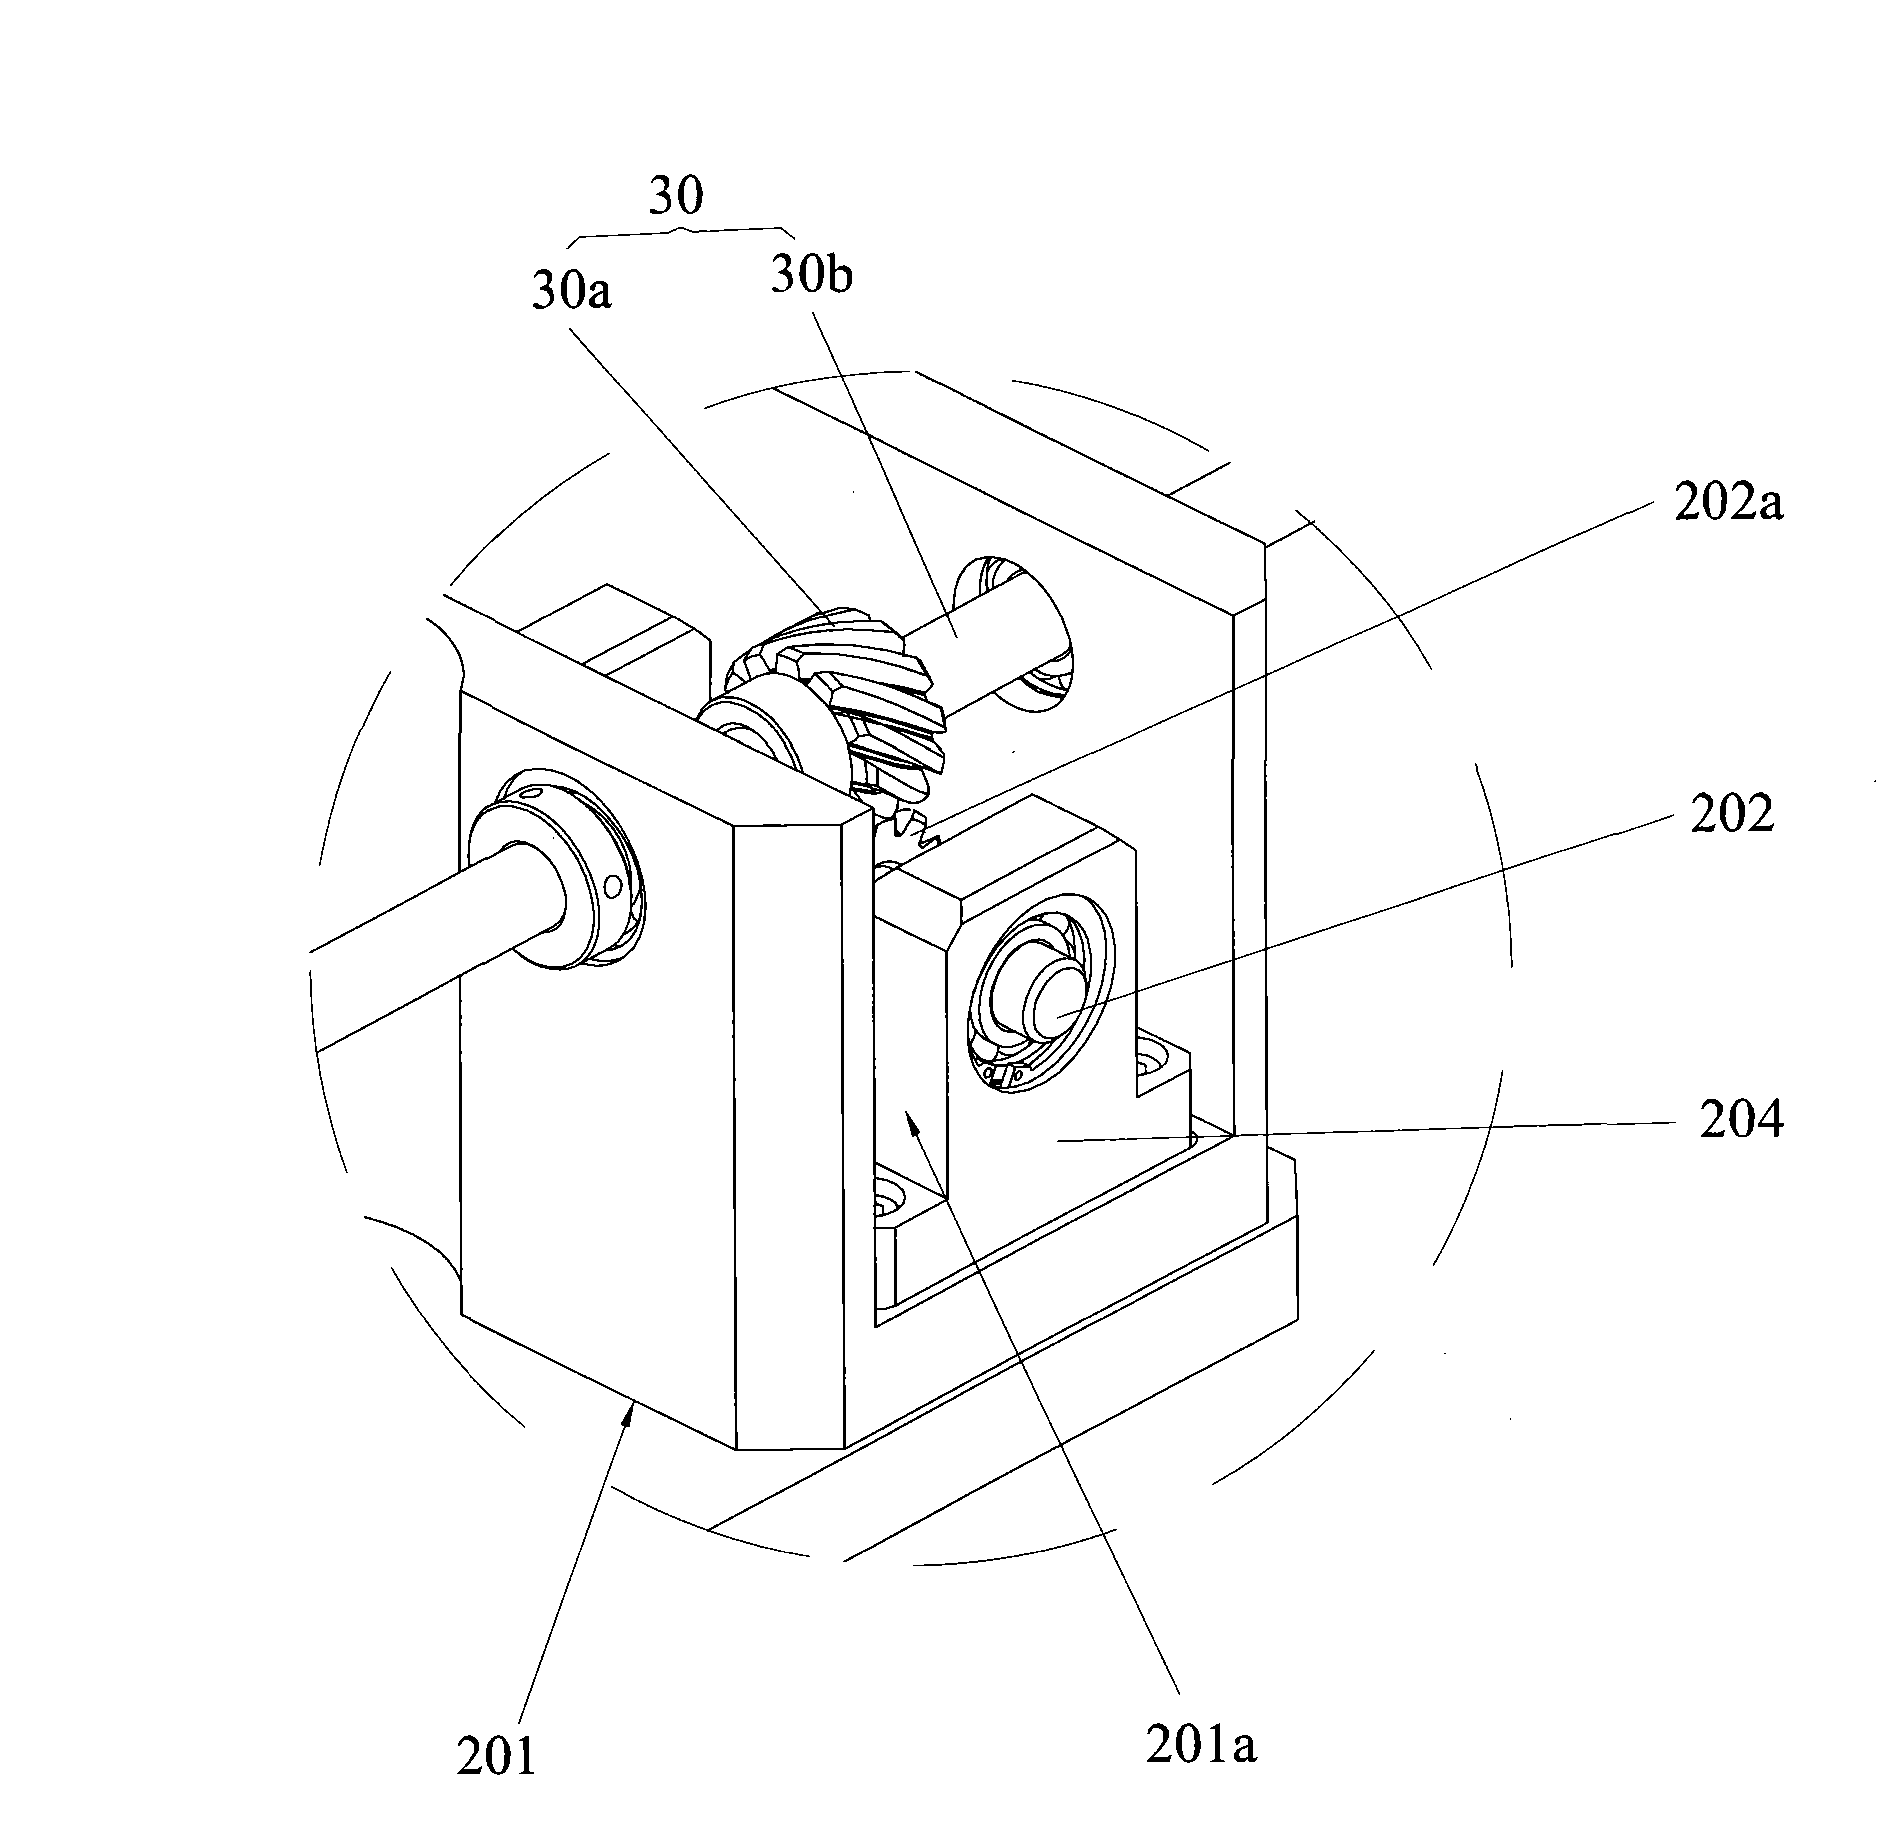 Substrate transmission mechanism